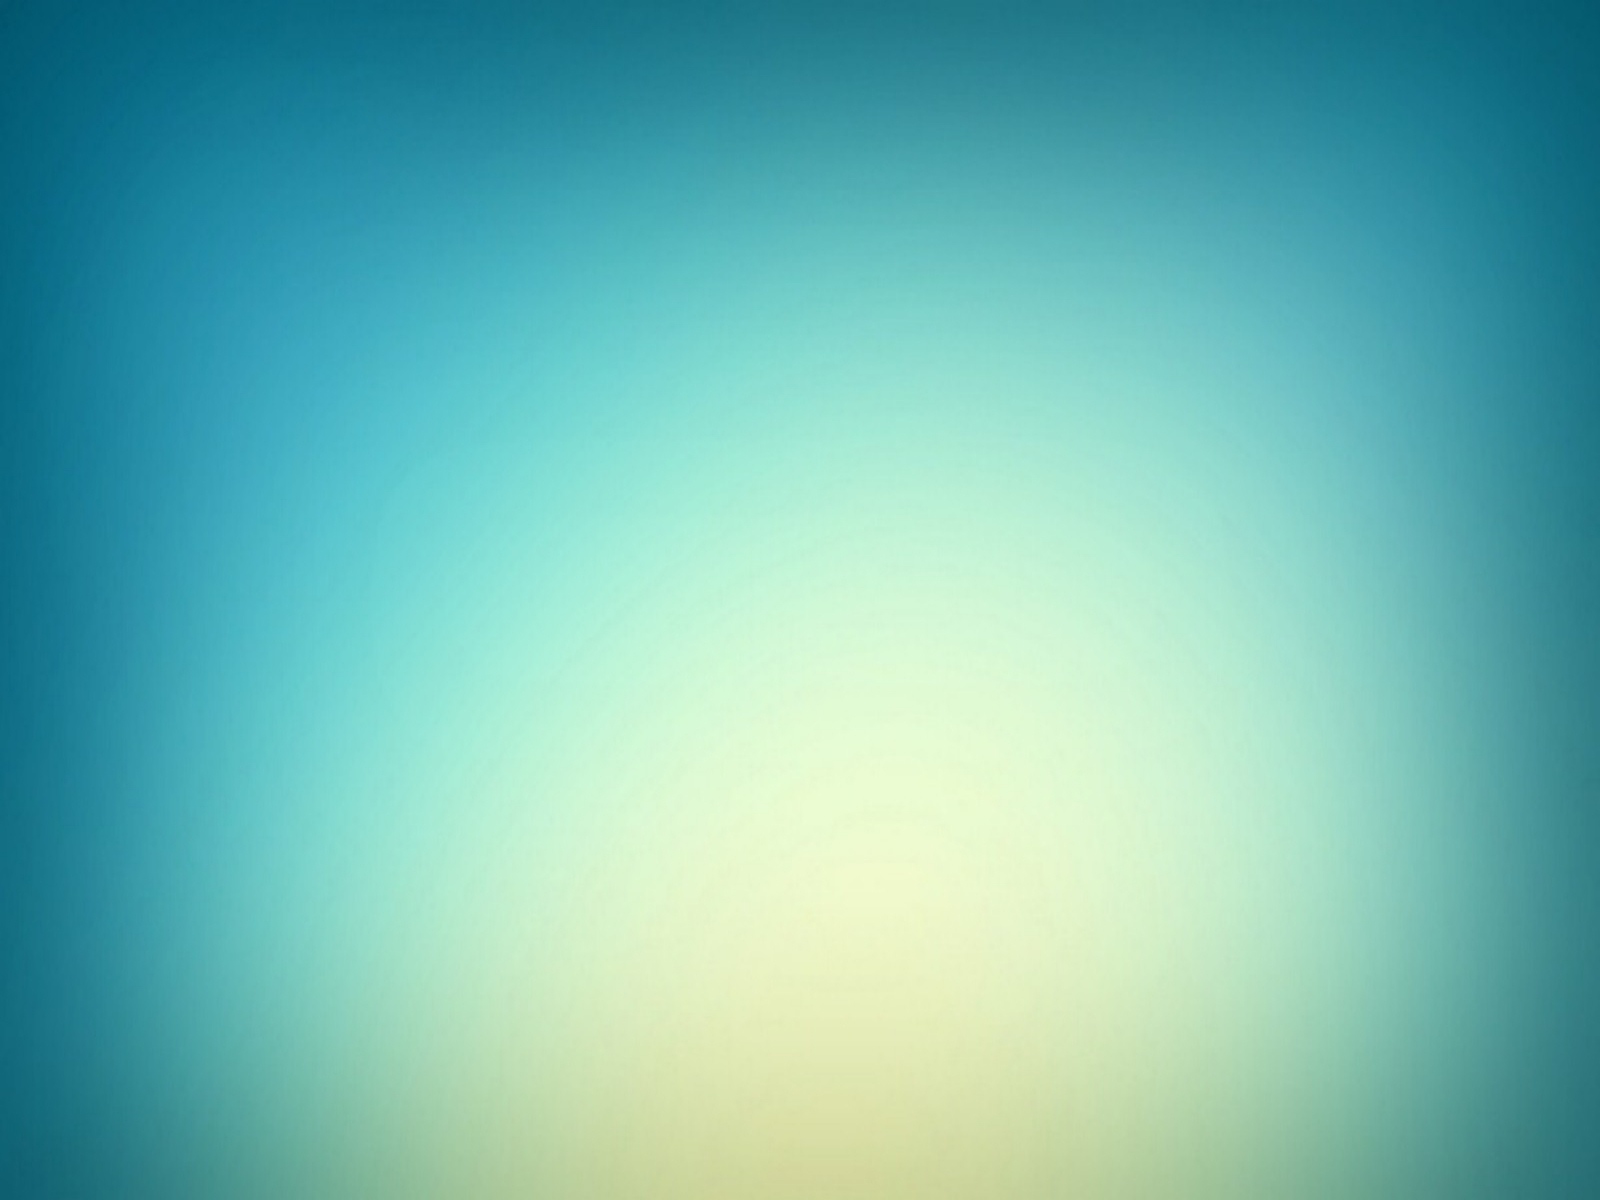 Free Simple Phone Backgrounds Wallpaper 1600x1200 32986